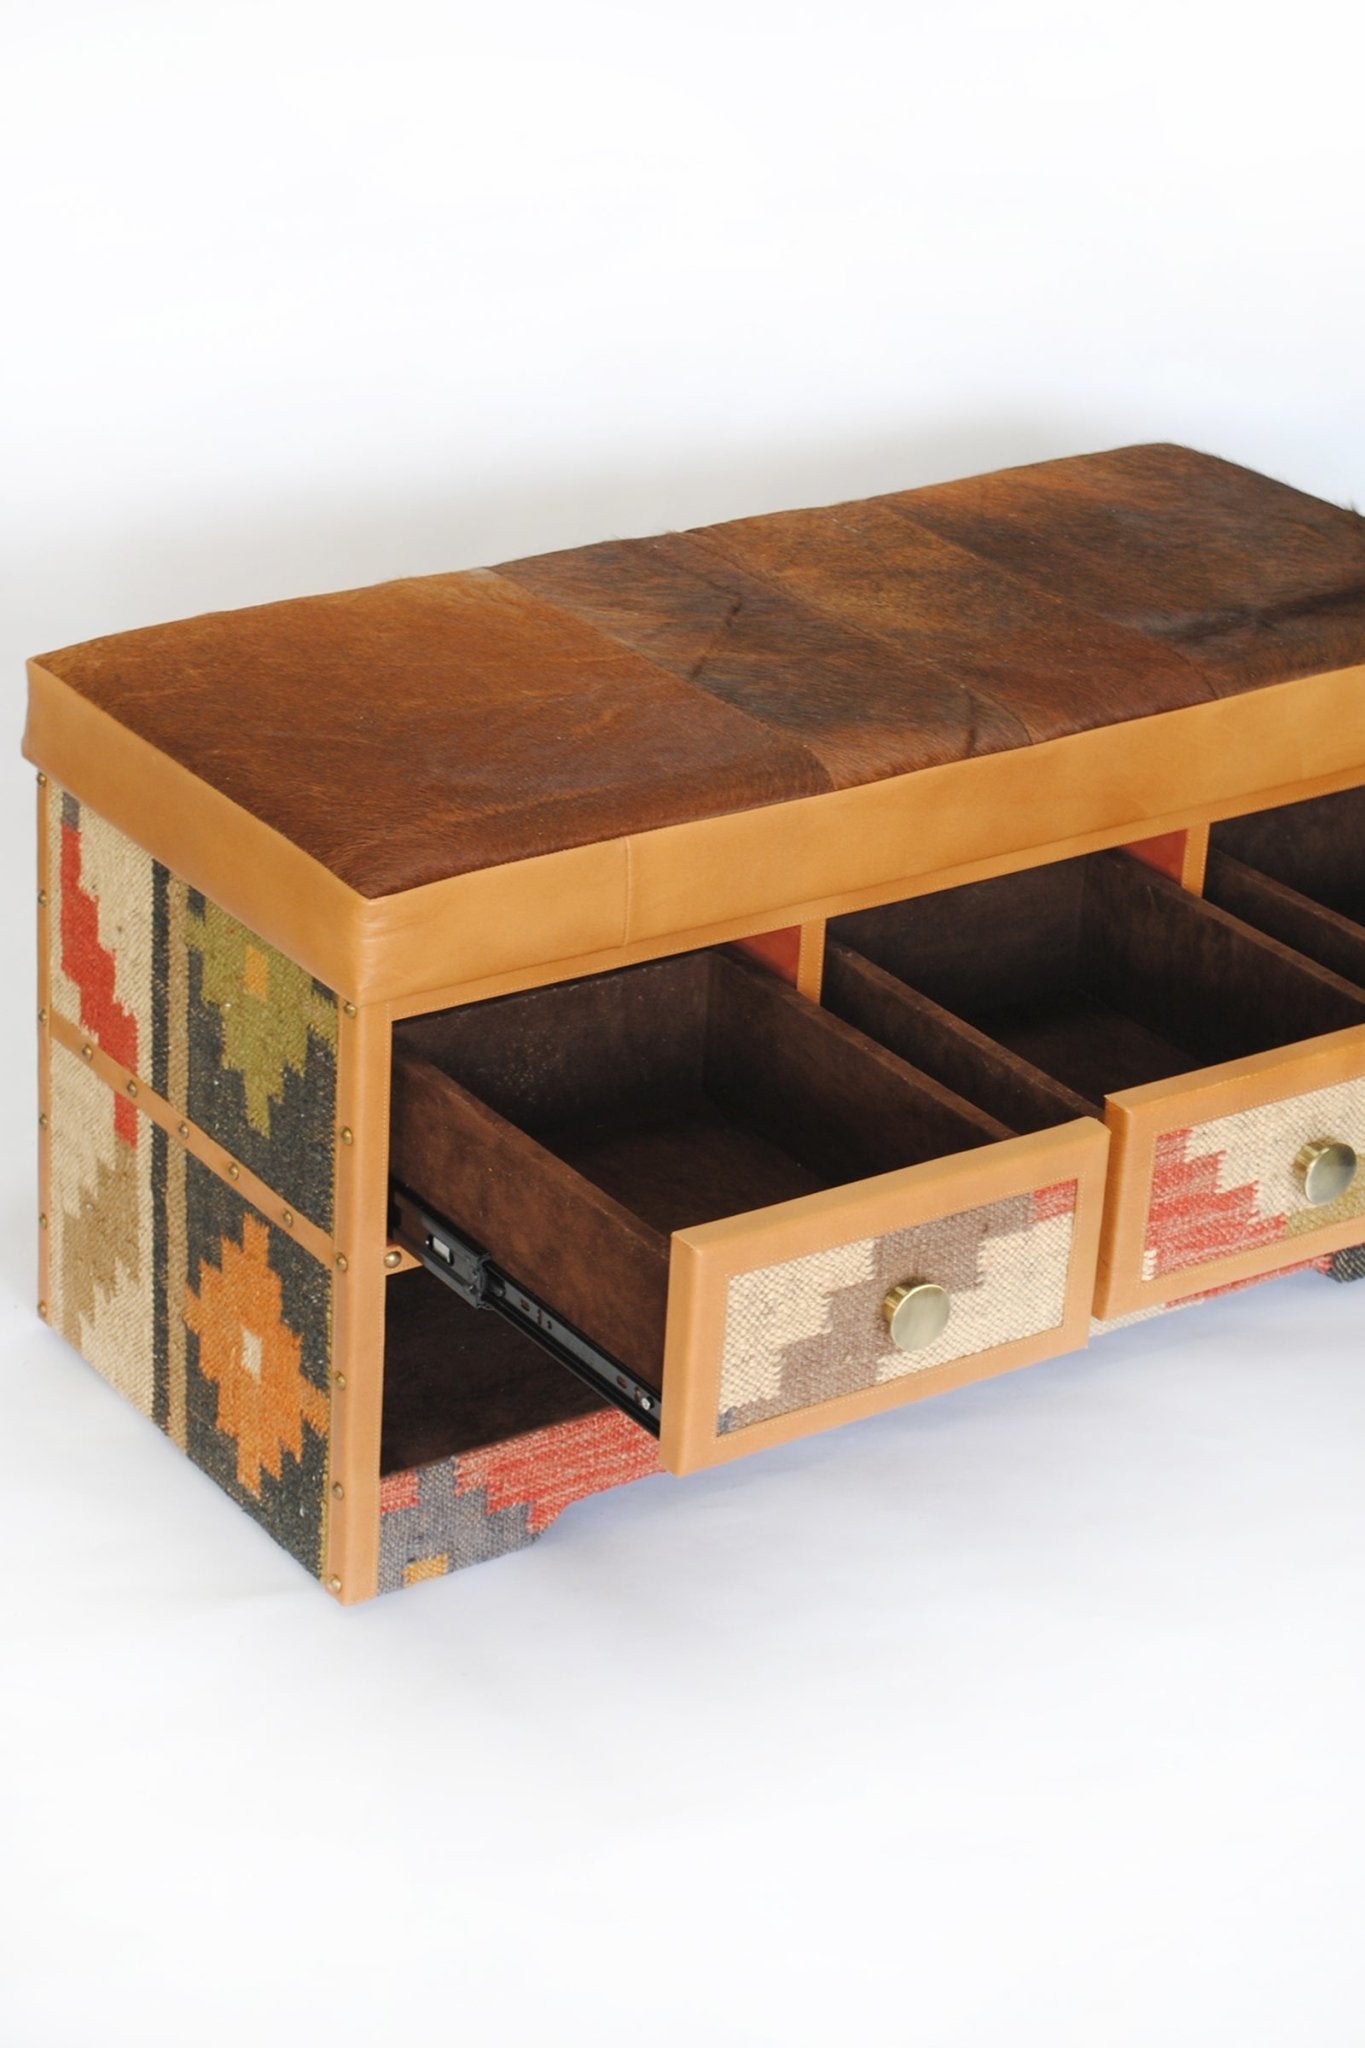 ARGO - BENCH WITH DRAWERS - ART AVENUE